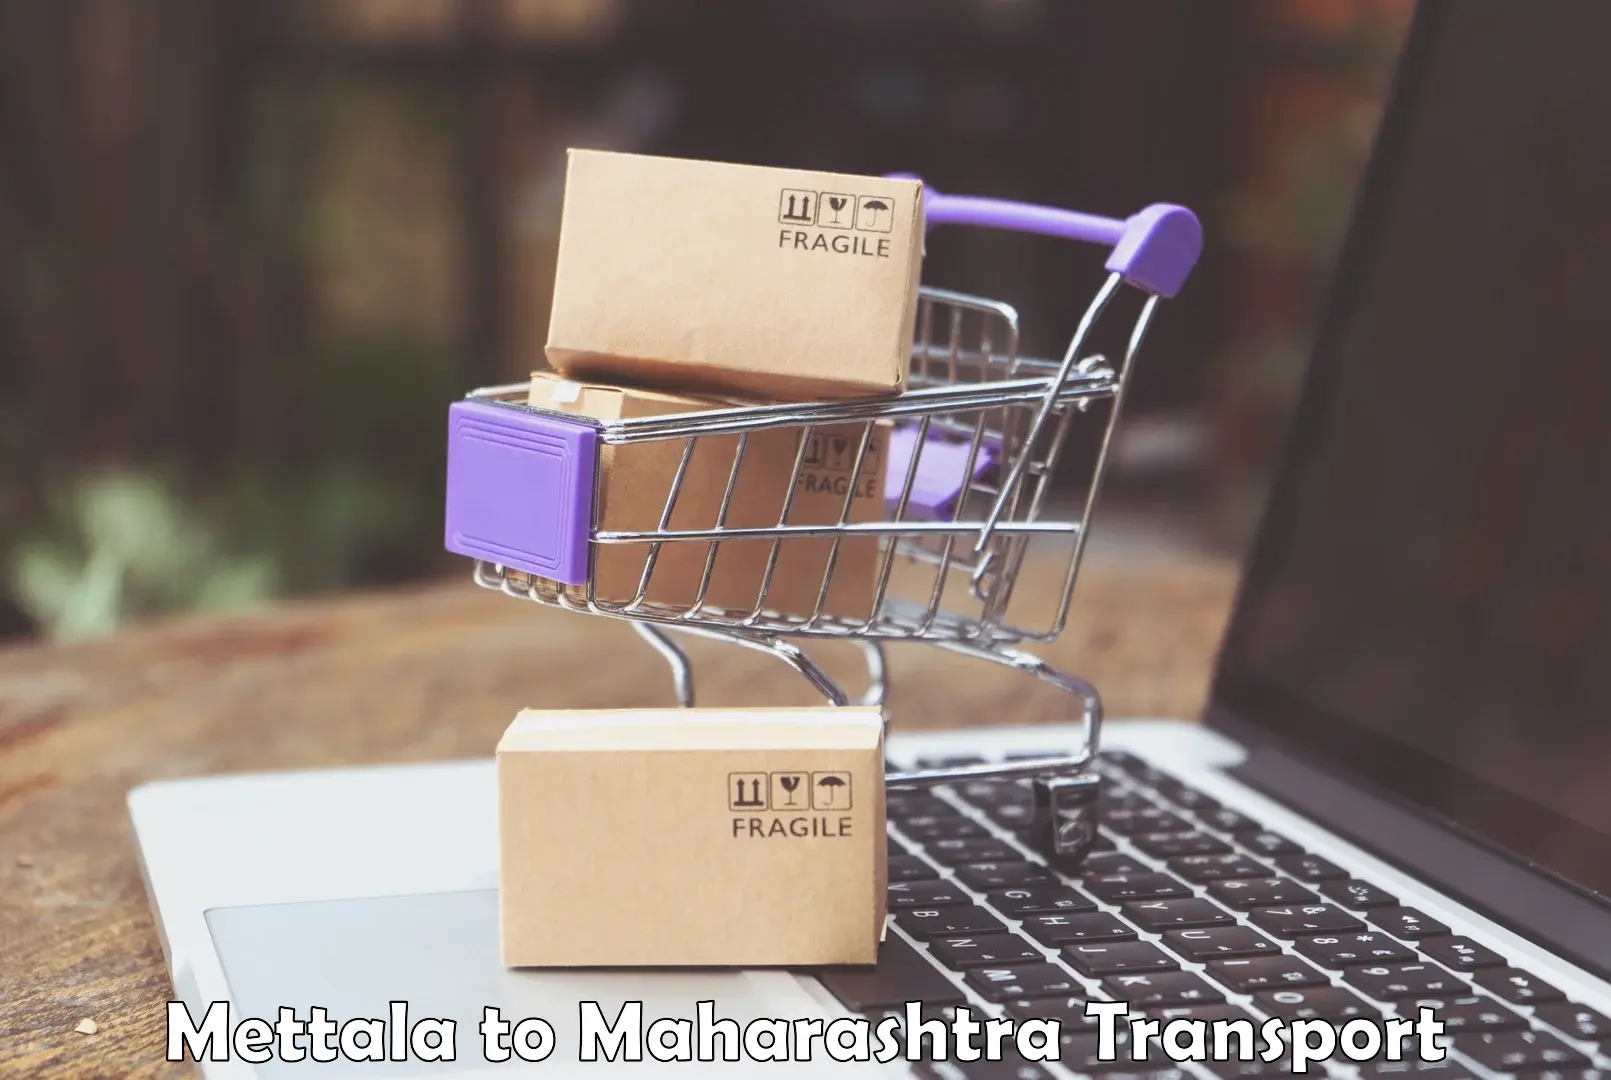 Air freight transport services Mettala to Mahabaleshwar